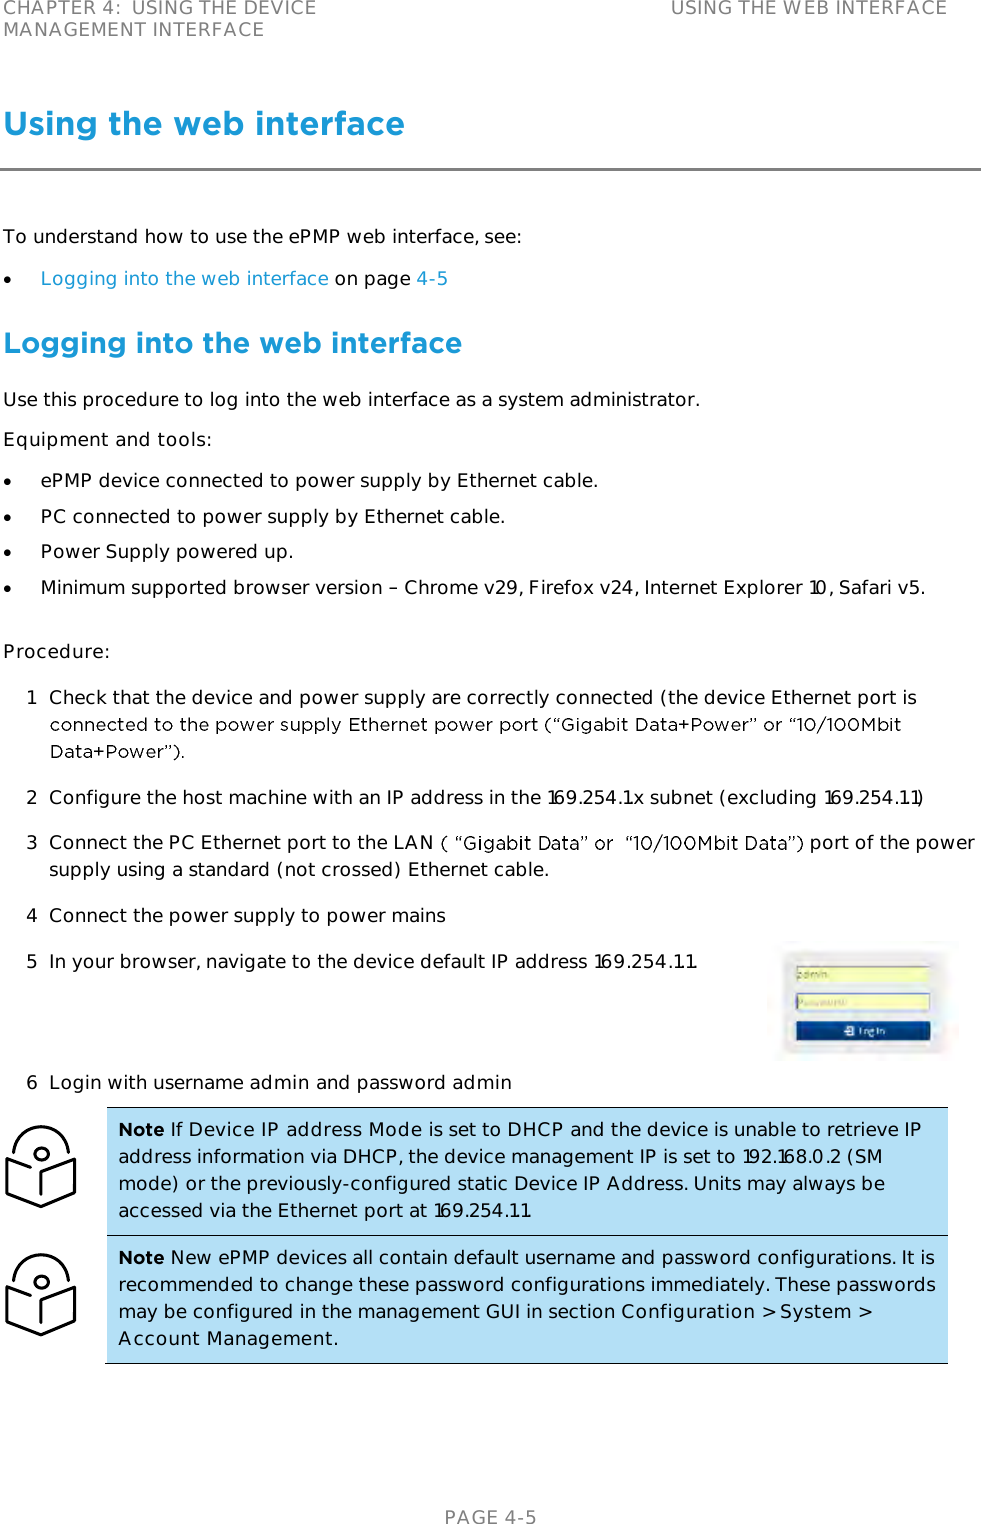 CHAPTER 4:  USING THE DEVICE MANAGEMENT INTERFACE USING THE WEB INTERFACE   PAGE 4-5 Using the web interface To understand how to use the ePMP web interface, see:  Logging into the web interface on page 4-5  Logging into the web interface Use this procedure to log into the web interface as a system administrator. Equipment and tools:  ePMP device connected to power supply by Ethernet cable.  PC connected to power supply by Ethernet cable.  Power Supply powered up.  Minimum supported browser version   Chrome v29, Firefox v24, Internet Explorer 10, Safari v5.  Procedure: 1 Check that the device and power supply are correctly connected (the device Ethernet port is  2 Configure the host machine with an IP address in the 169.254.1.x subnet (excluding 169.254.1.1) 3 Connect the PC Ethernet port to the LAN  port of the power supply using a standard (not crossed) Ethernet cable. 4 Connect the power supply to power mains 5 In your browser, navigate to the device default IP address 169.254.1.1.  6 Login with username admin and password admin  Note If Device IP address Mode is set to DHCP and the device is unable to retrieve IP address information via DHCP, the device management IP is set to 192.168.0.2 (SM mode) or the previously-configured static Device IP Address. Units may always be accessed via the Ethernet port at 169.254.1.1.  Note New ePMP devices all contain default username and password configurations. It is recommended to change these password configurations immediately. These passwords may be configured in the management GUI in section Configuration &gt; System &gt; Account Management.  